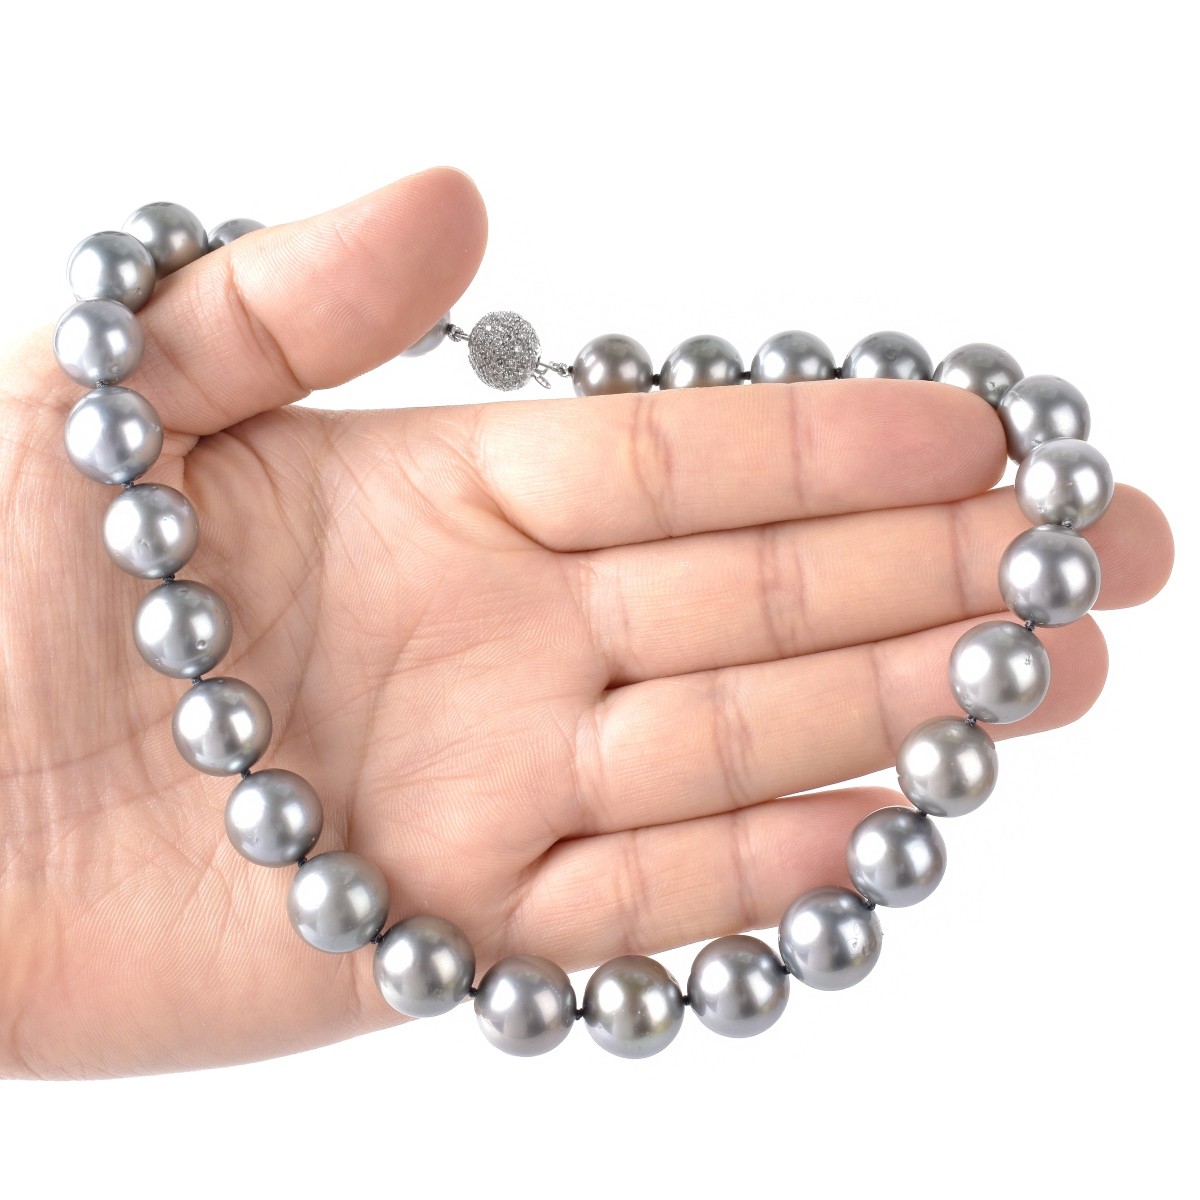 11.5-14.0mm Tahitian Gray Pearl Necklace - Image 6 of 6